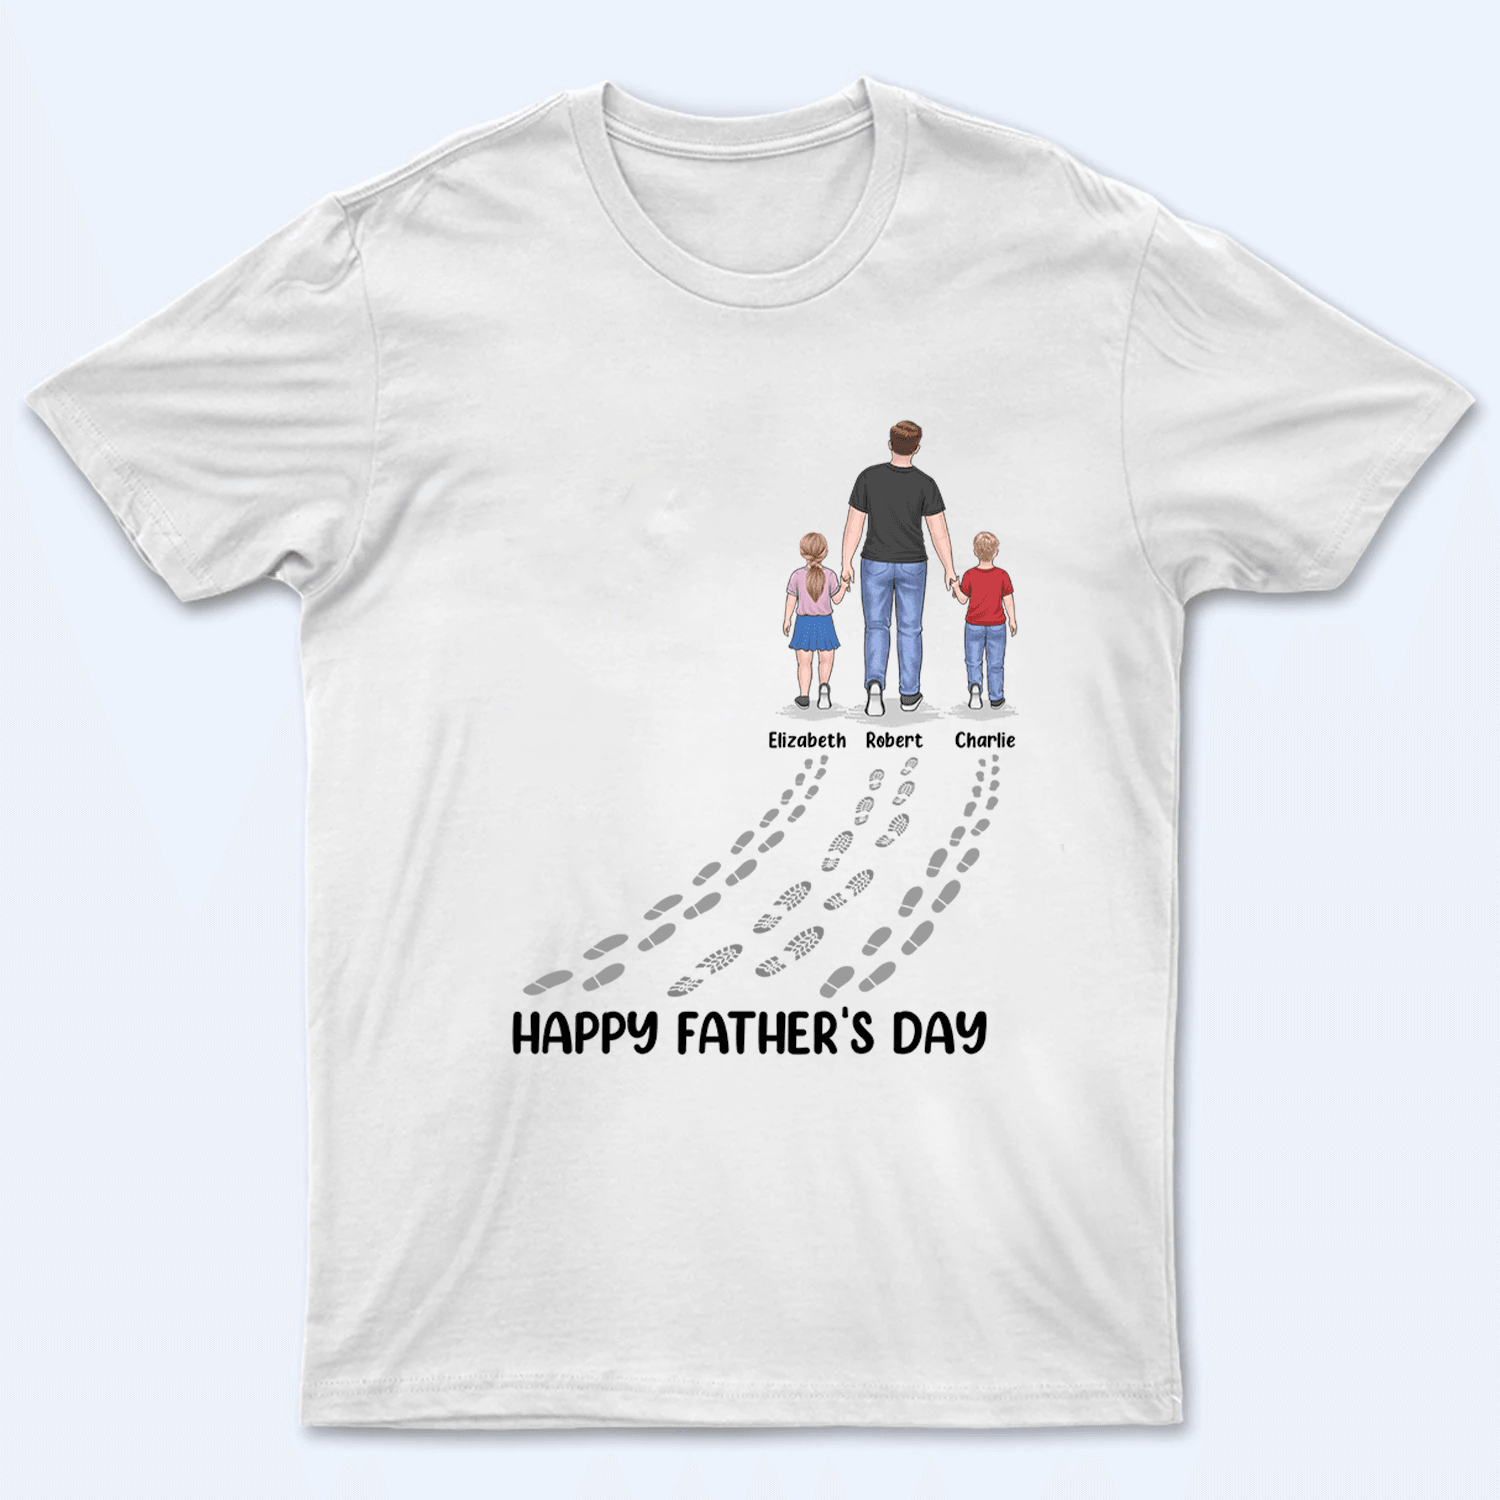 Fathers And Childs Footprints - Personalized Custom T Shirt - Father's Day Gift for Dad, Papa, Grandpa, Daddy, Dada - Suzitee Store